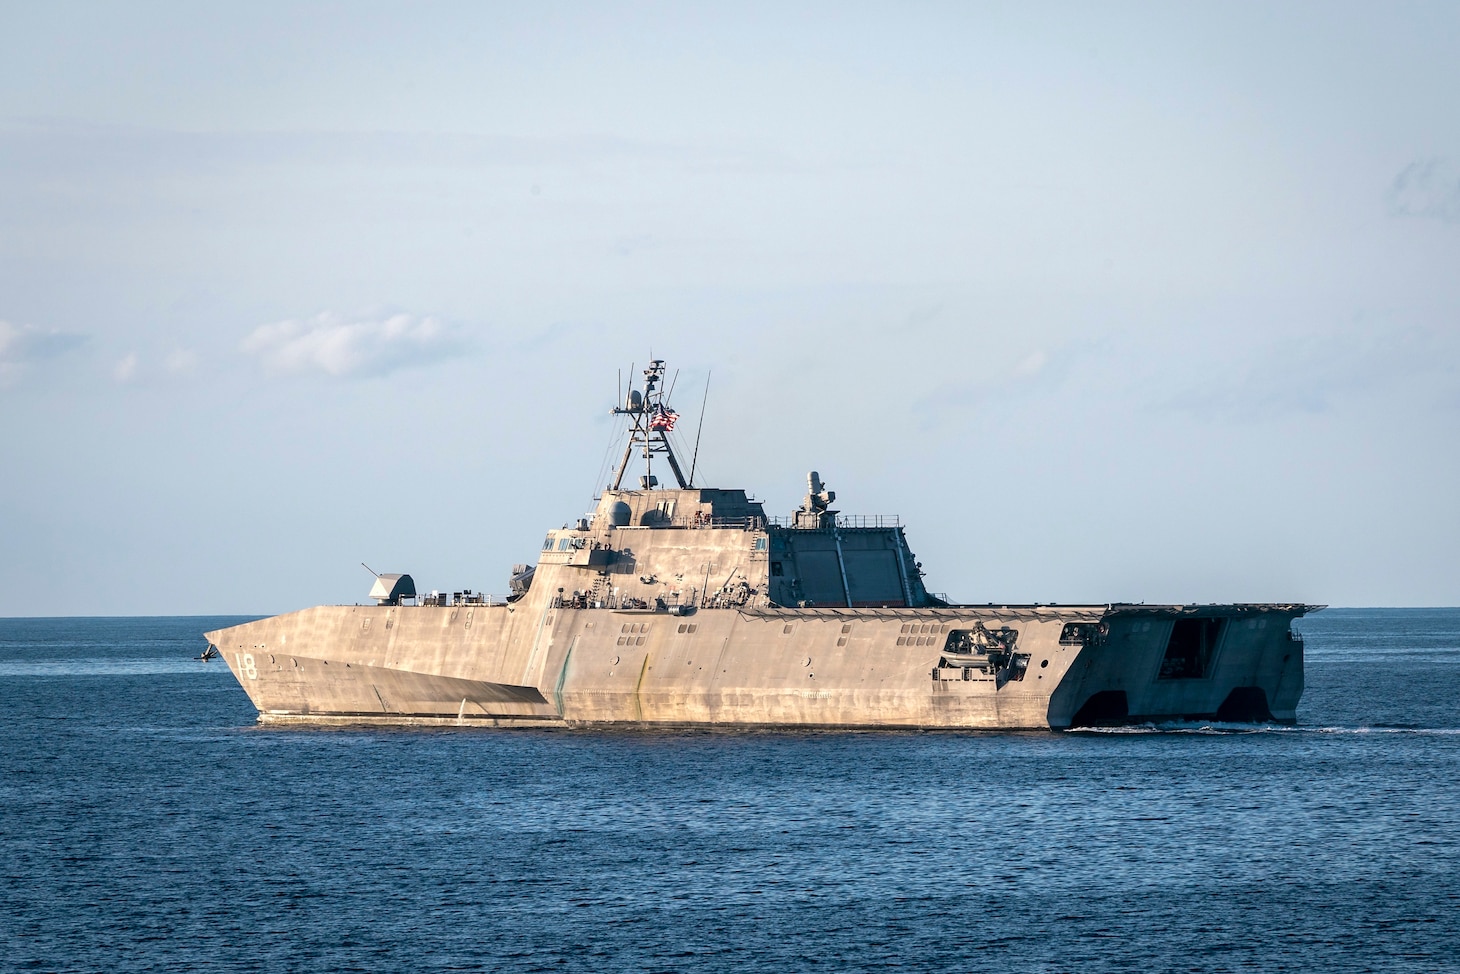 ARAFURA SEA (Sept. 20, 2022) The Independence-variant littoral combat ship USS Charleston sails in the waters off Northern Australian during the Royal Australian Navy (RAN) Exercise Kakadu 2022 (KA22), Sept. 20, 2022. KA22 is the 15th iteration of the RAN’s flagship biennial regional maritime international engagement exercise, drawing together approximately 3000 personnel, 15 warships and more than 30 aircraft from 22 countries. (Photo courtesy of Royal Australian Navy LSIS Jarryd Capper)